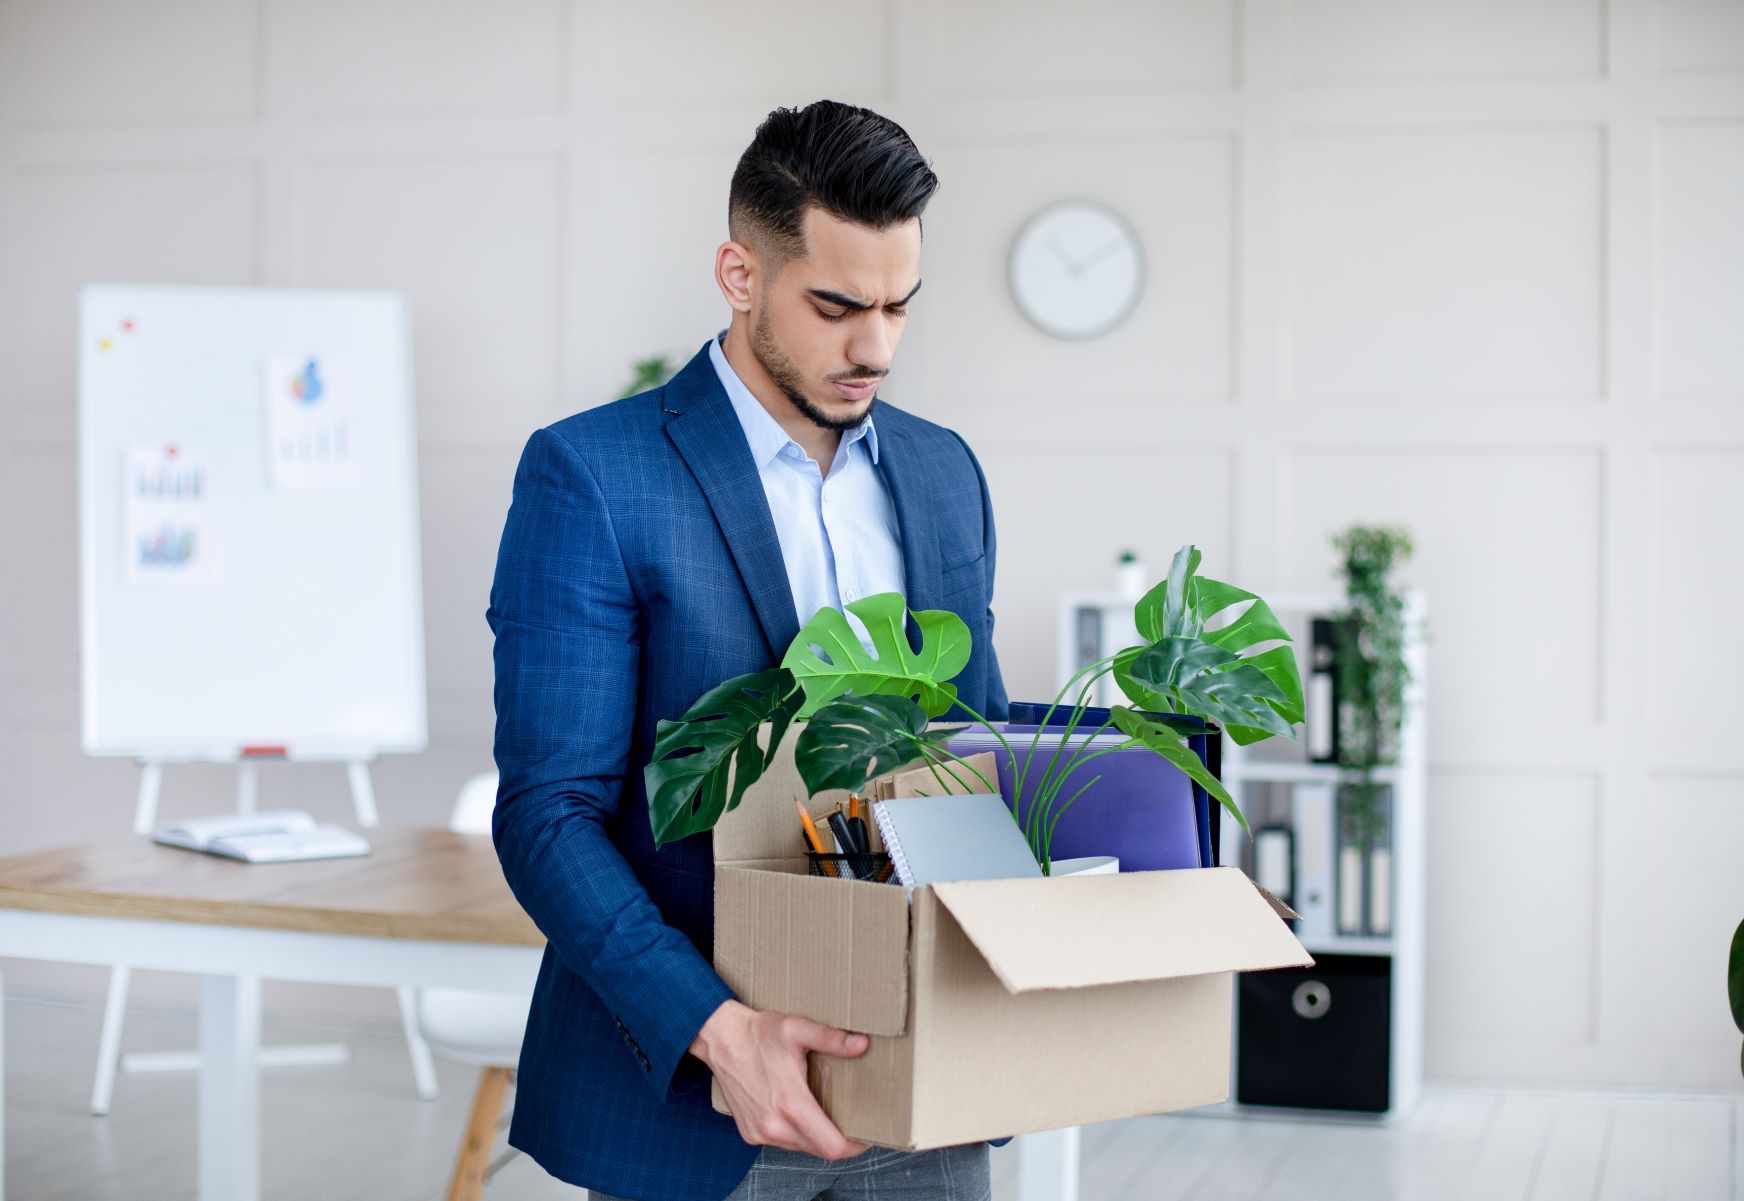 4 Things You Need to Know About Constructive Dismissal